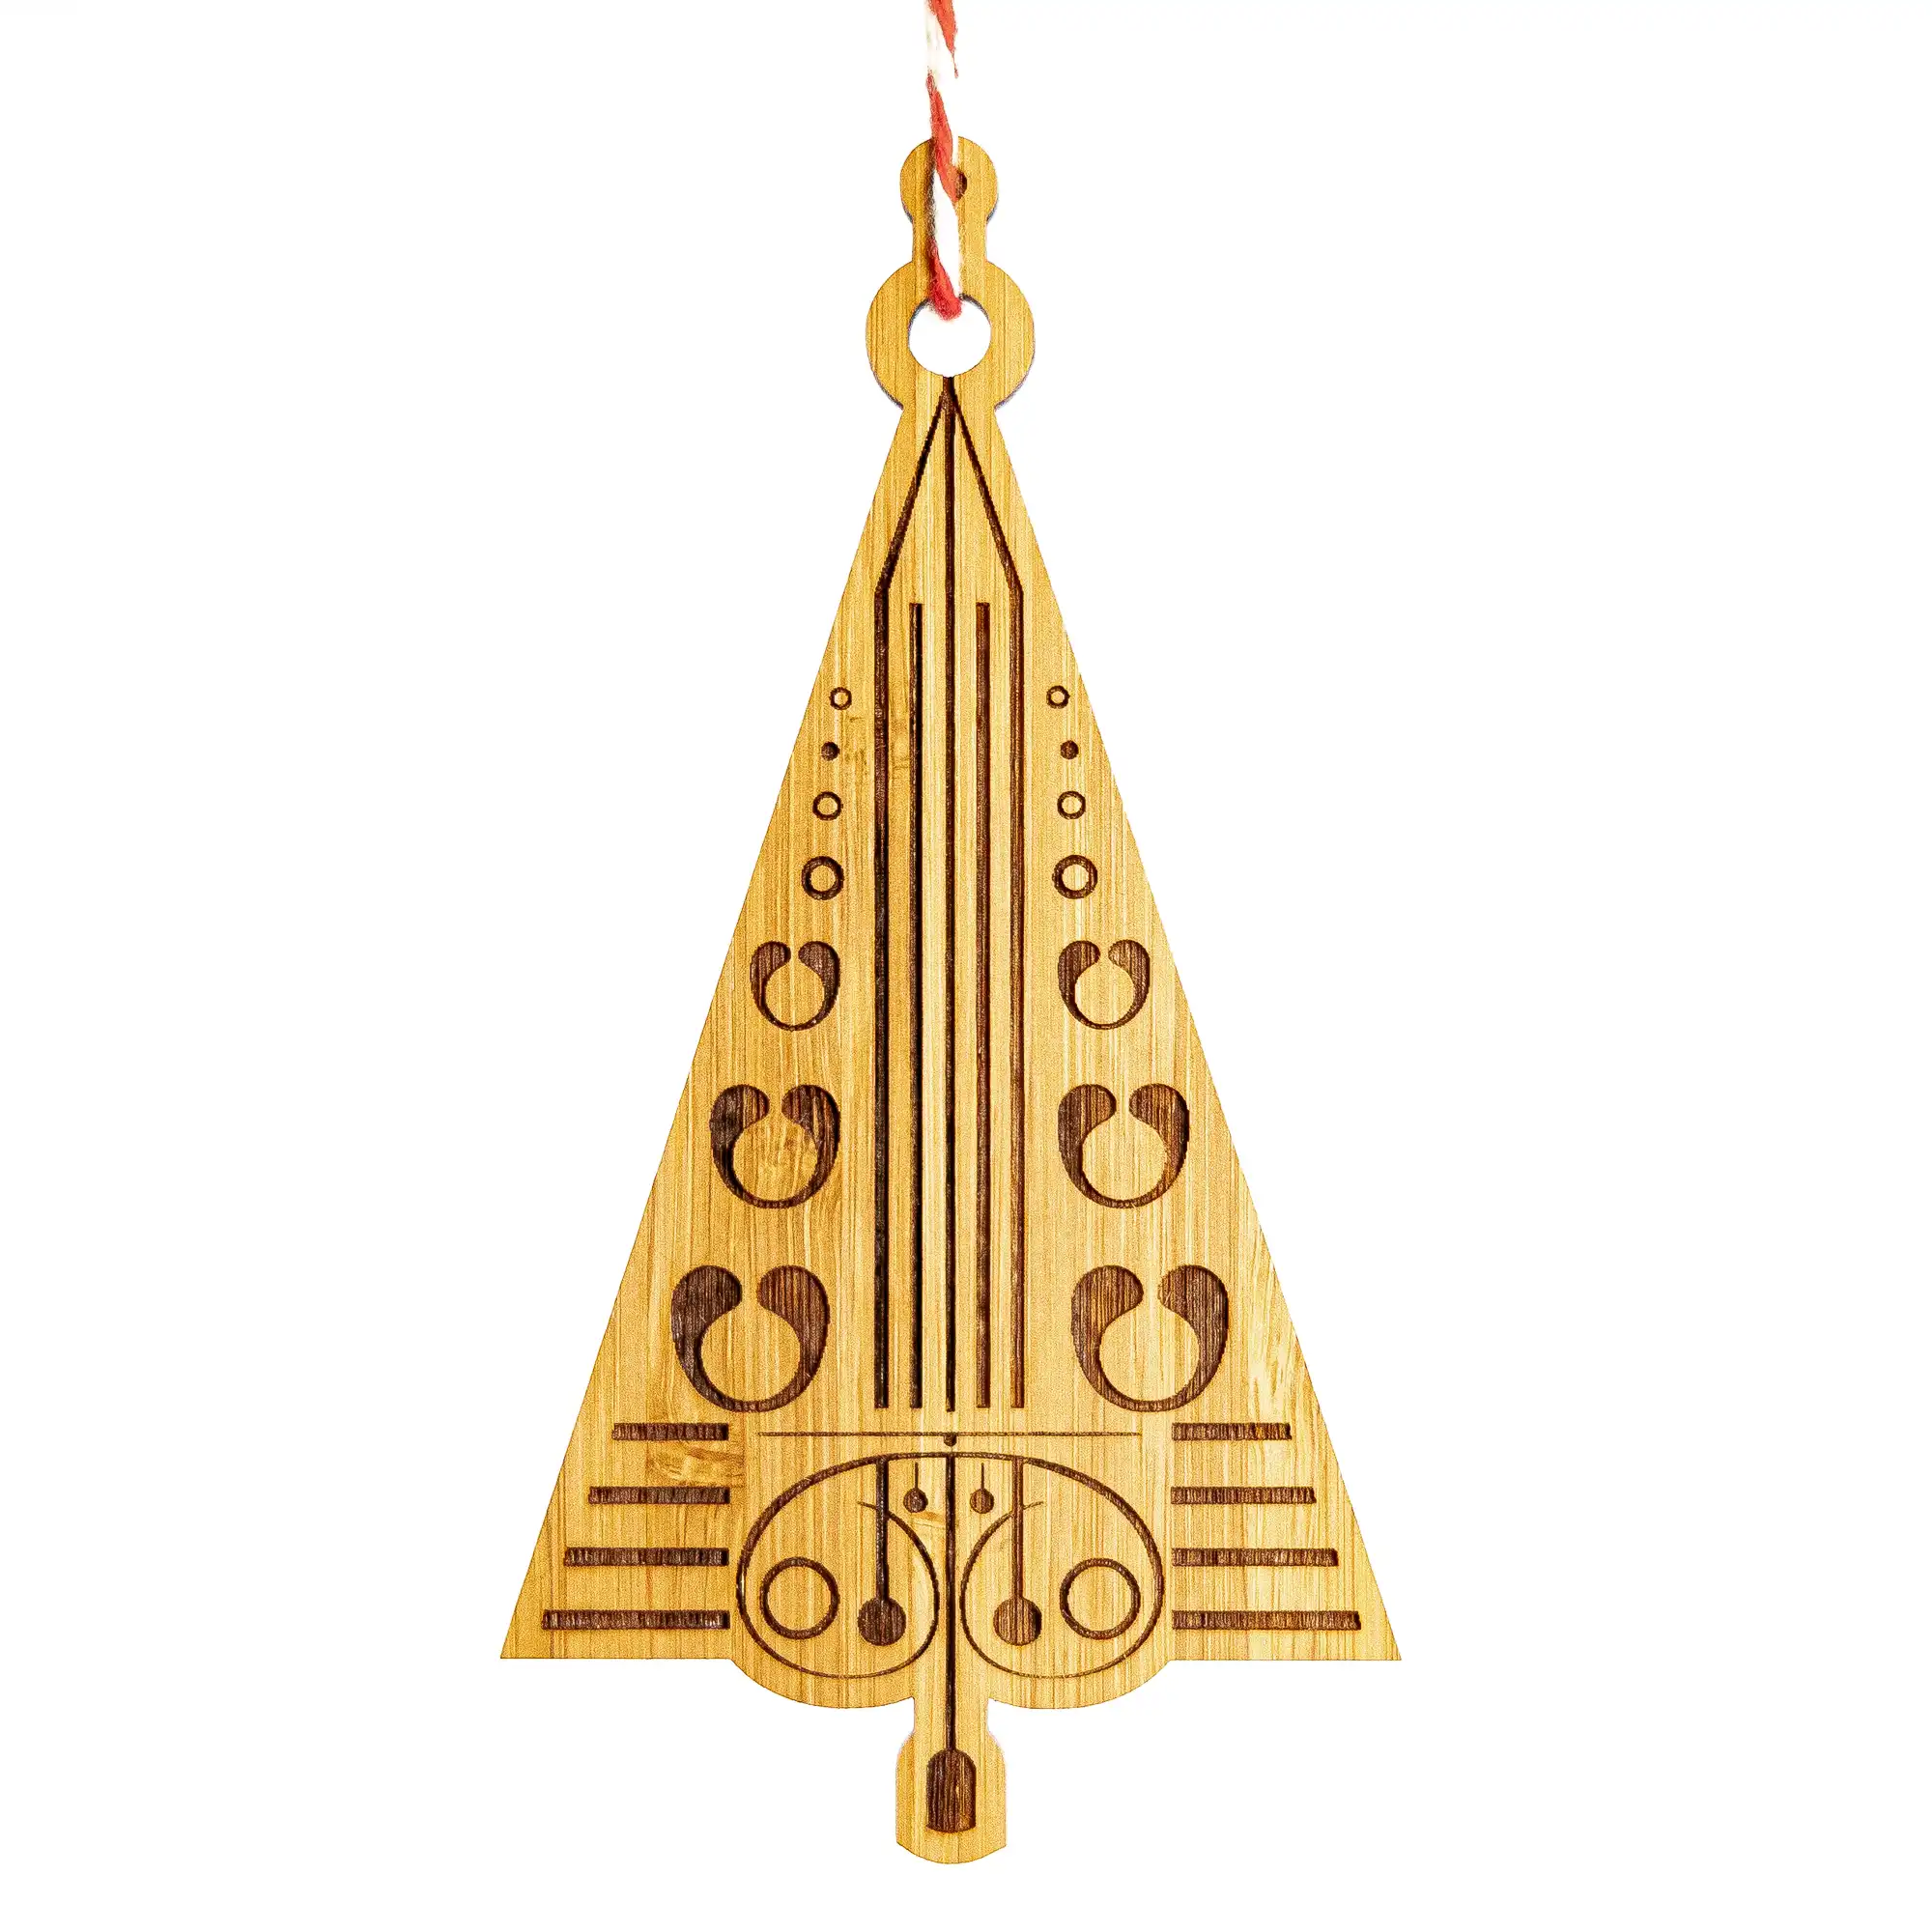 Bamboo Art Nouveau Christmas Tree Decorations - Eco-friendly gifts and ornaments - Kyloe Creations